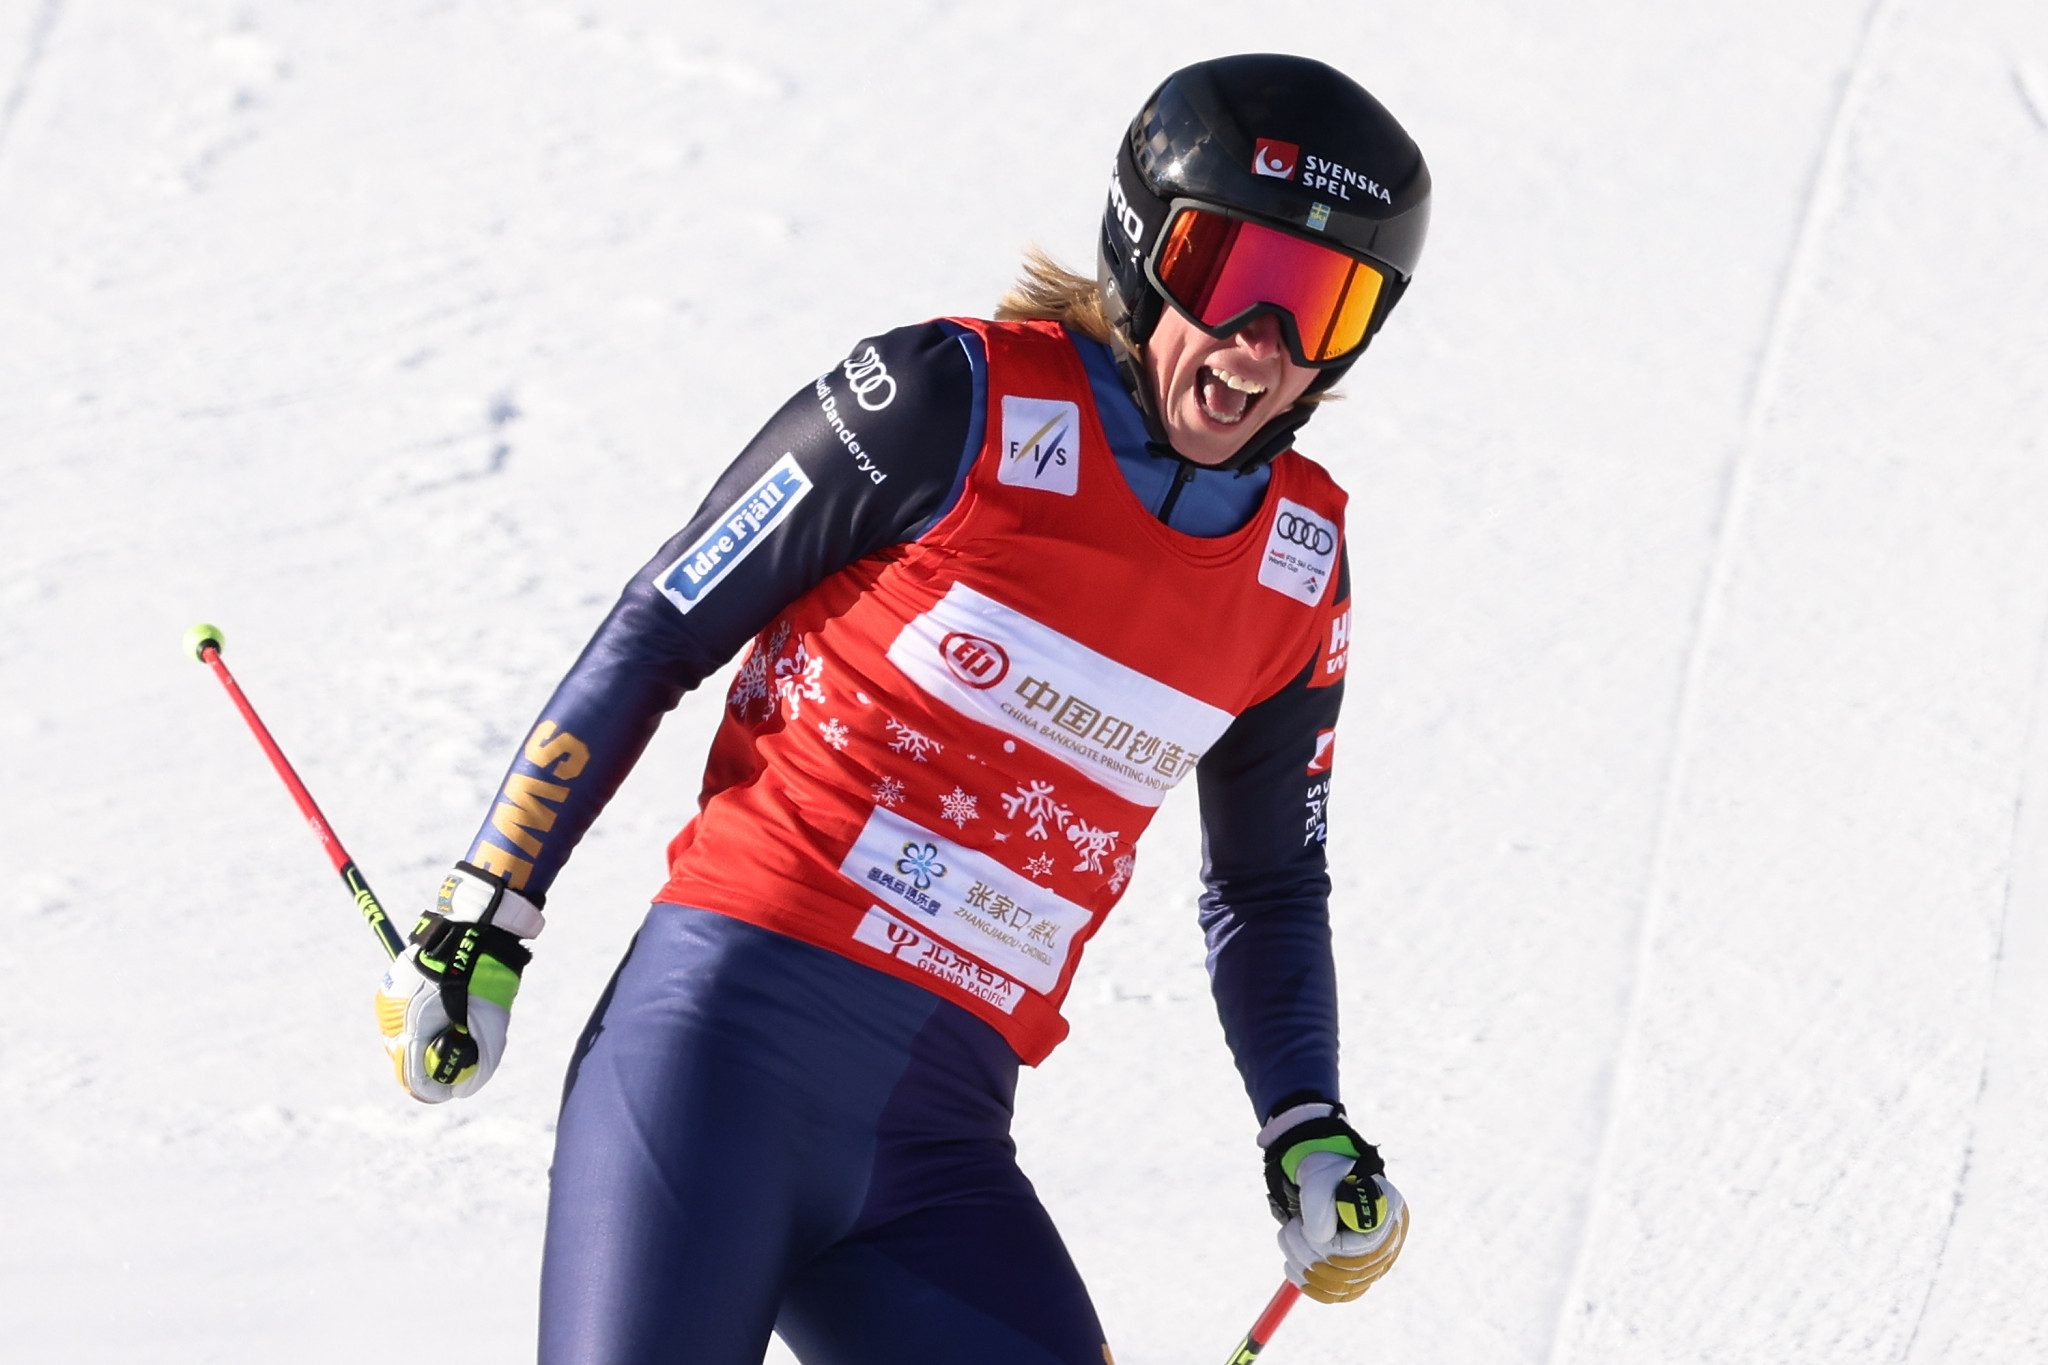 Naeslund leads women's Freestyle Ski World Cup qualification as men's event postponed